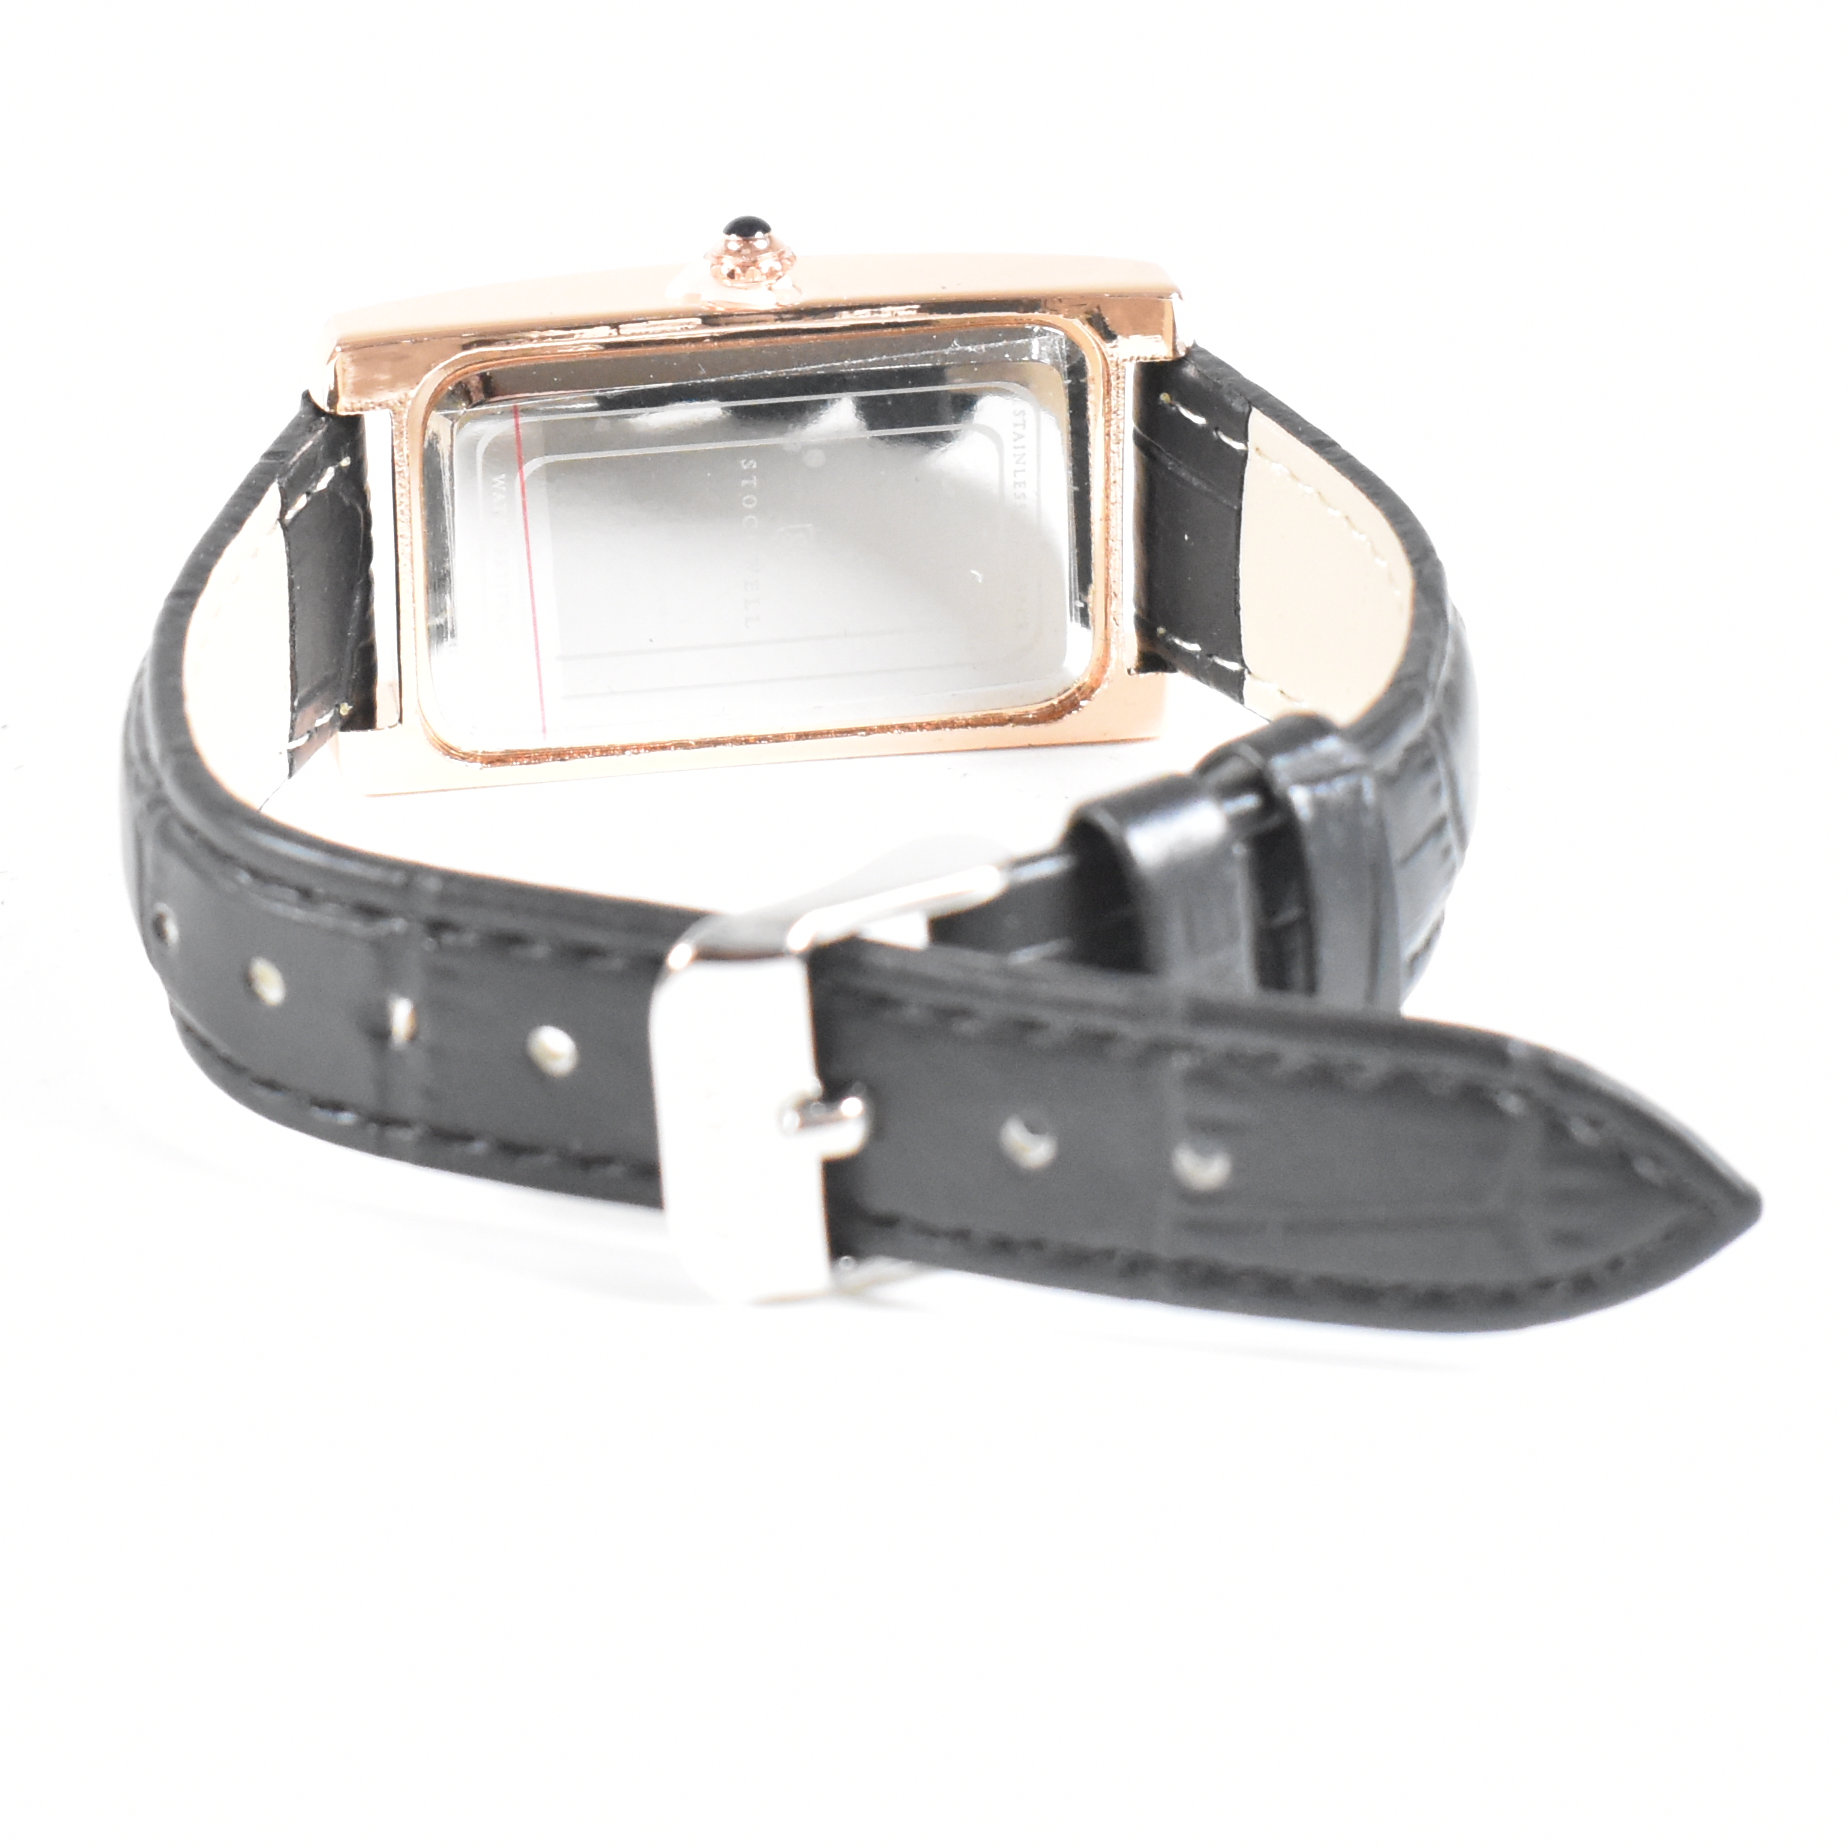 LADIES CASED STOCKWELL WRIST WATCH - Image 5 of 5